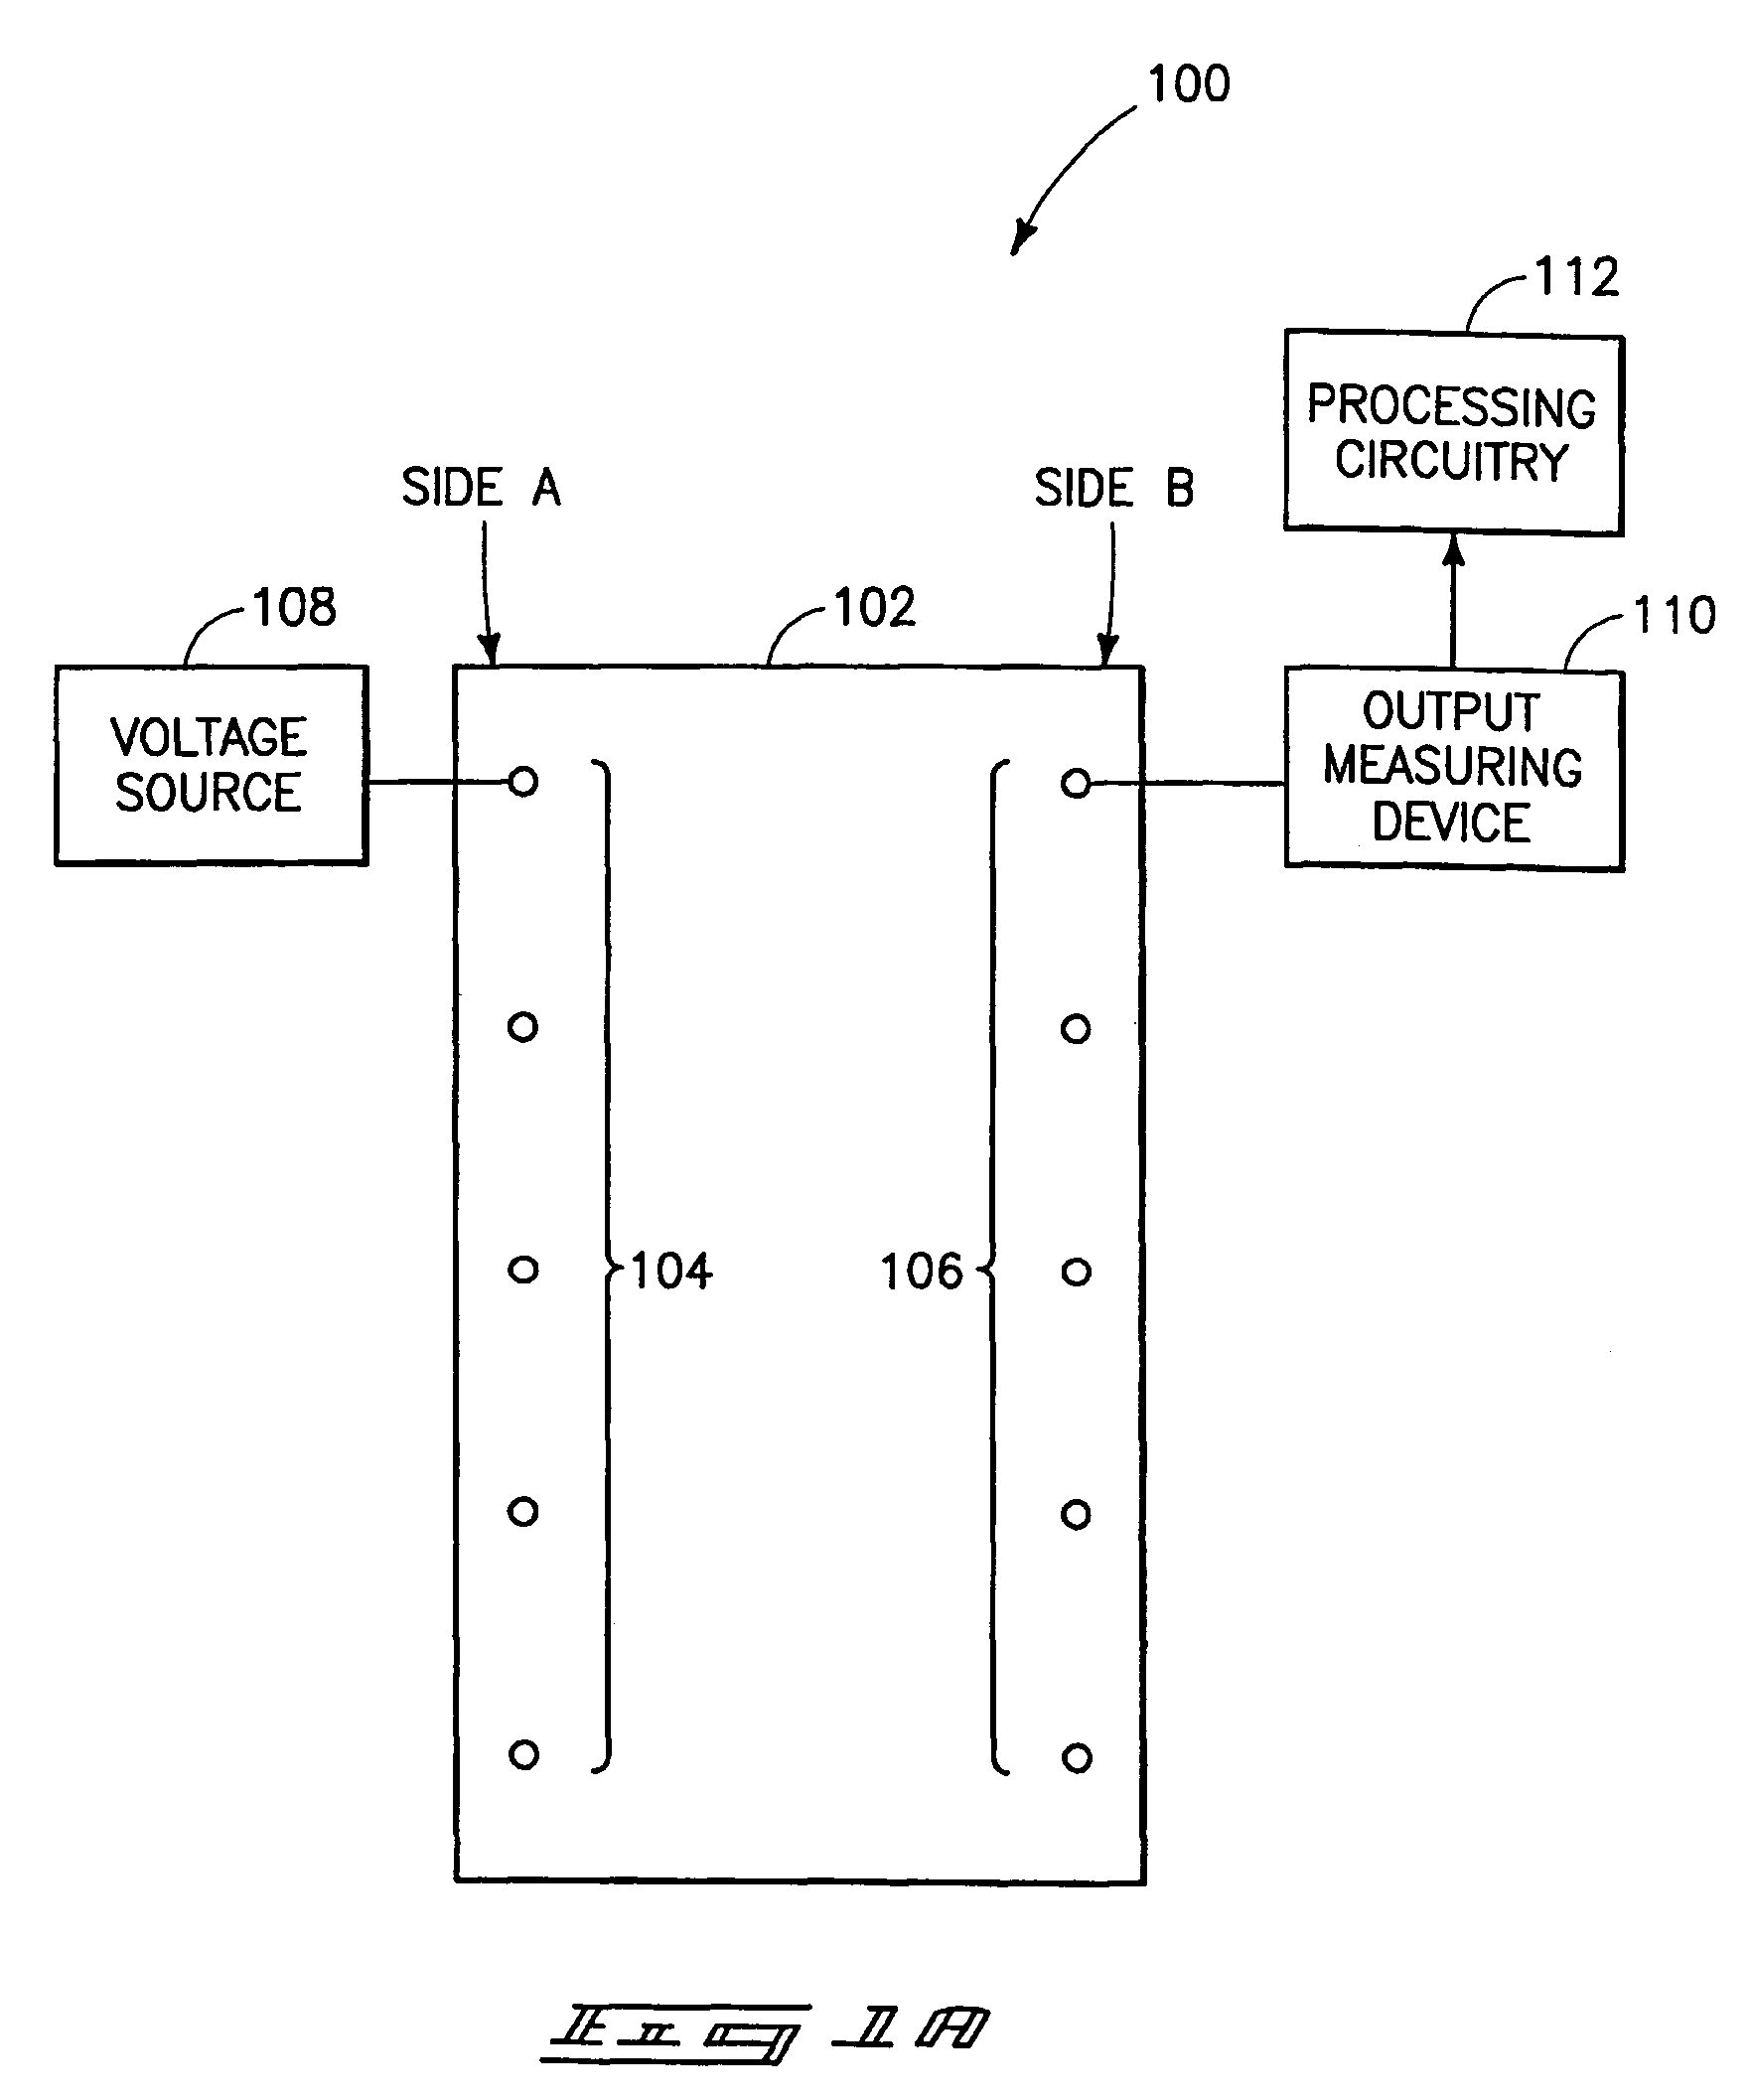 Electrochemical impedance spectroscopy system and methods for determining spatial locations of defects